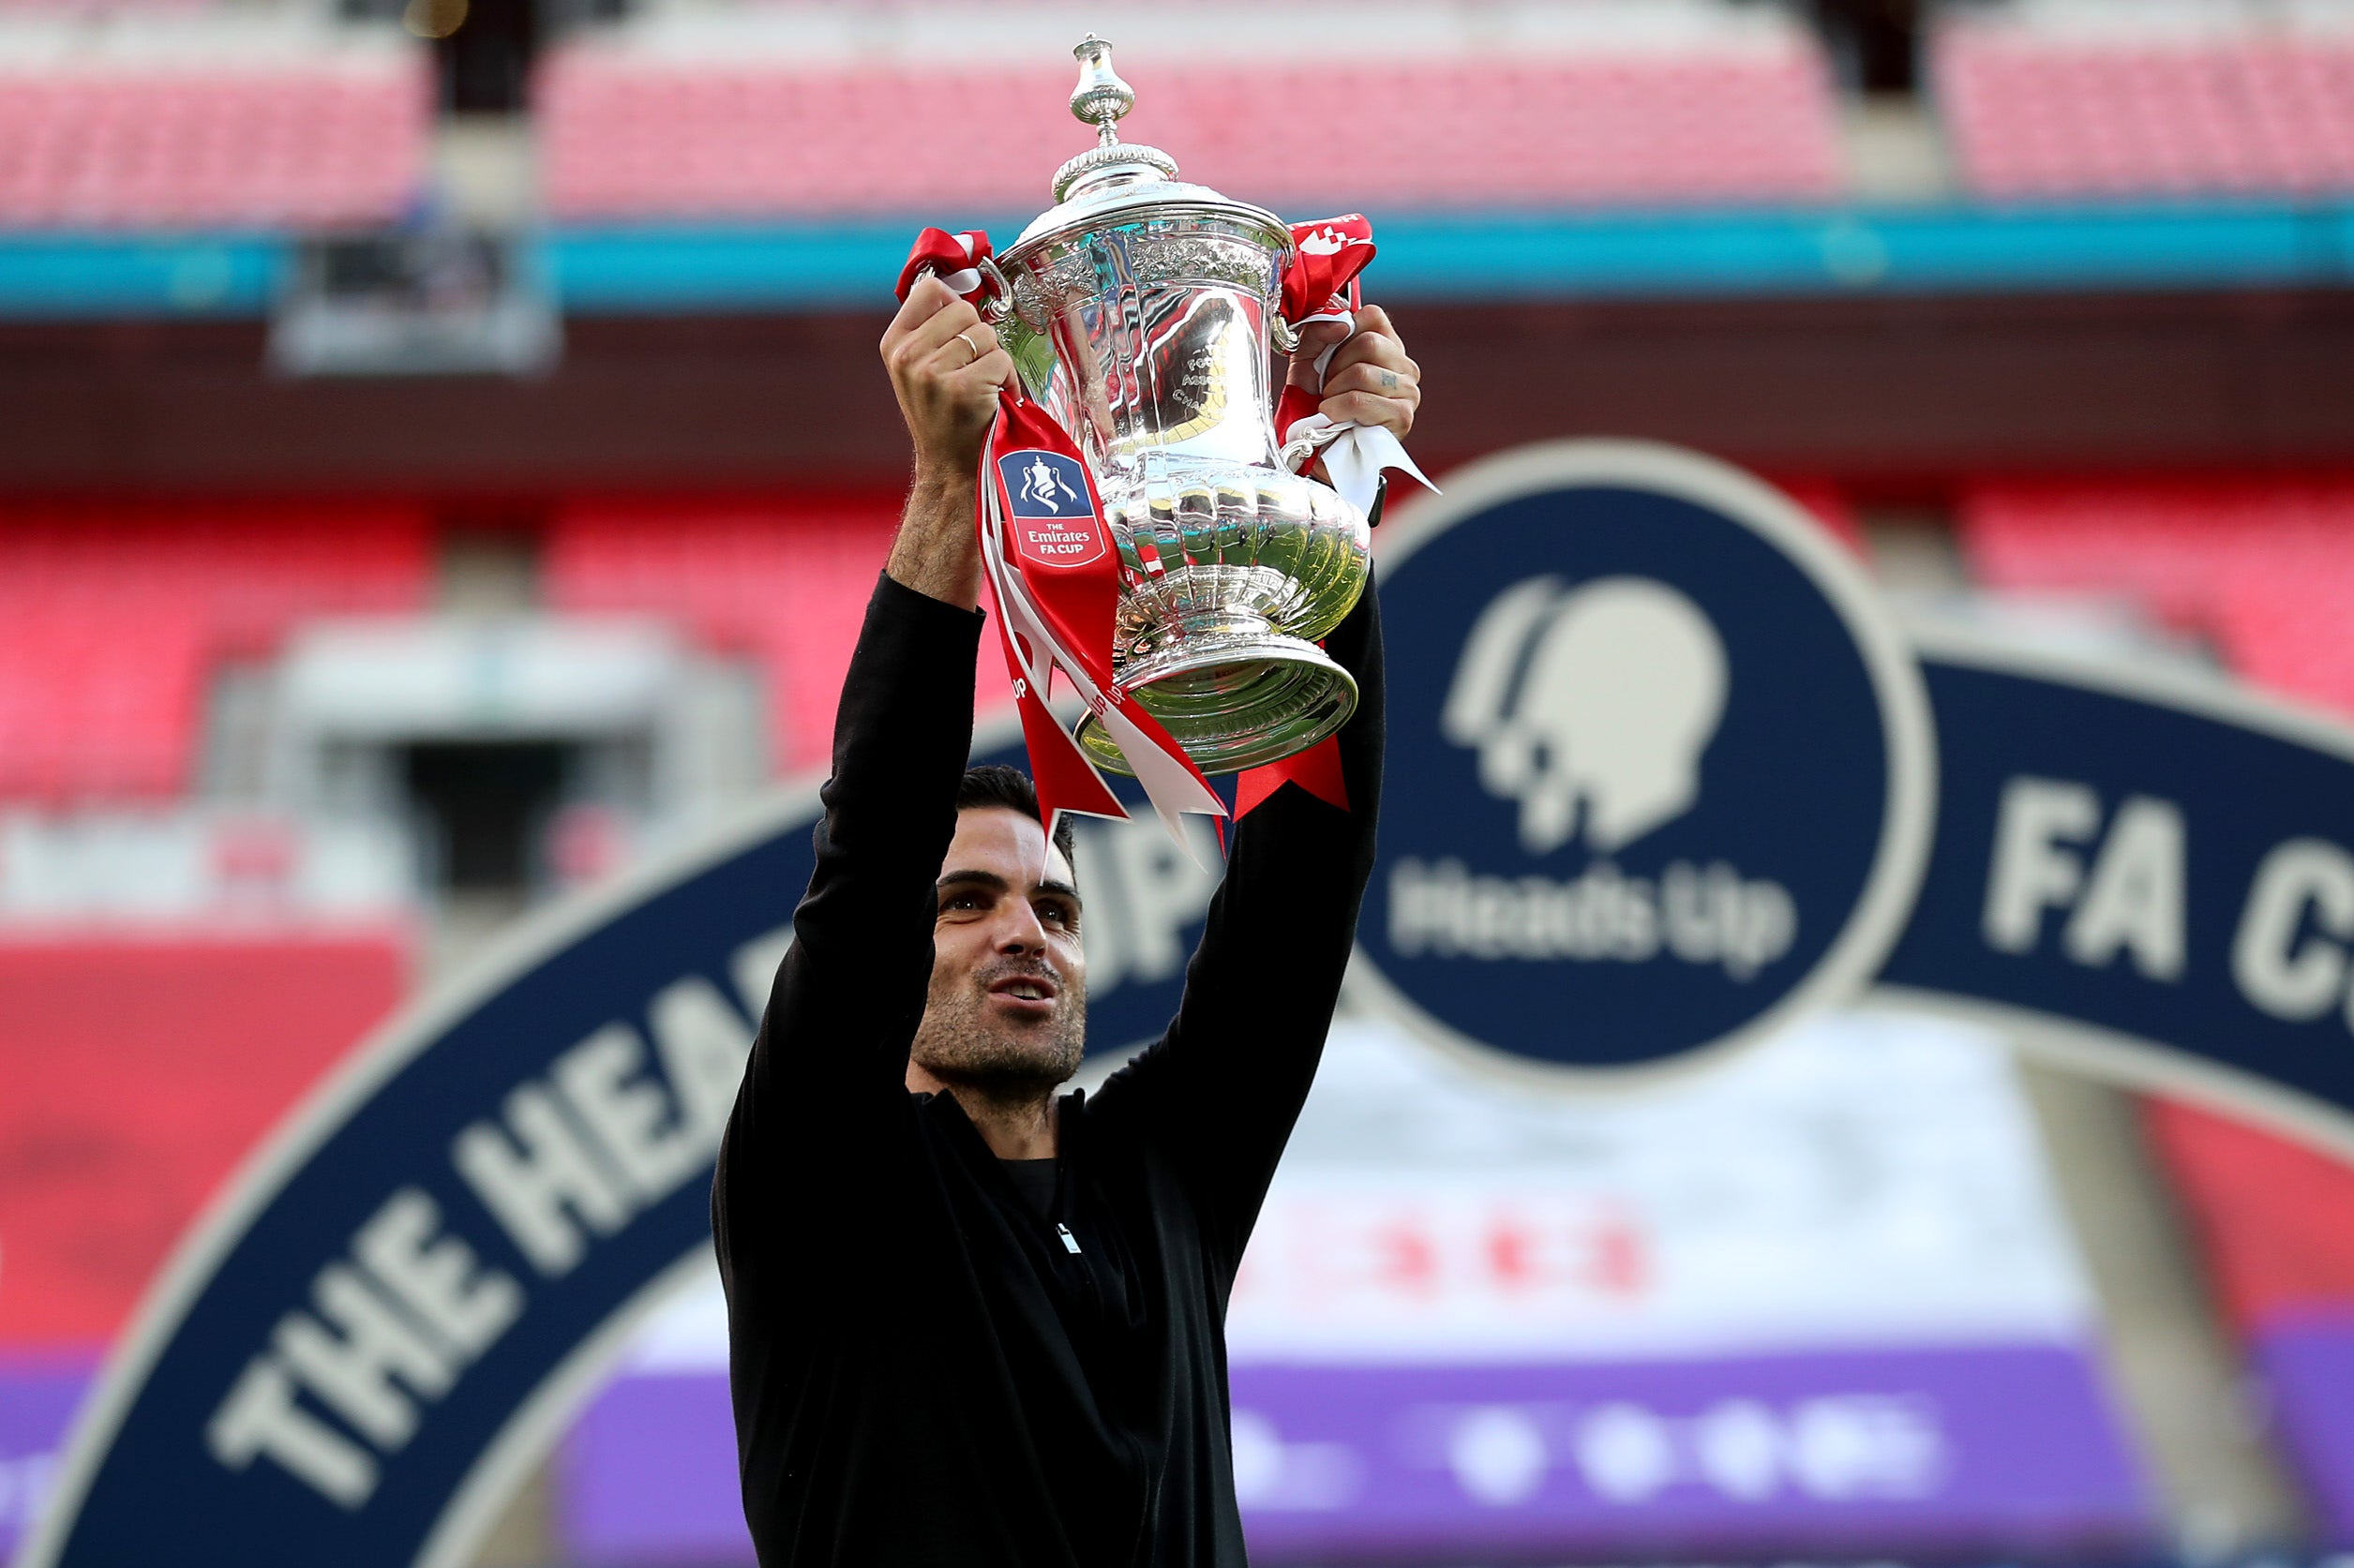 Mikel Arteta has won the FA Cup as a player and manager